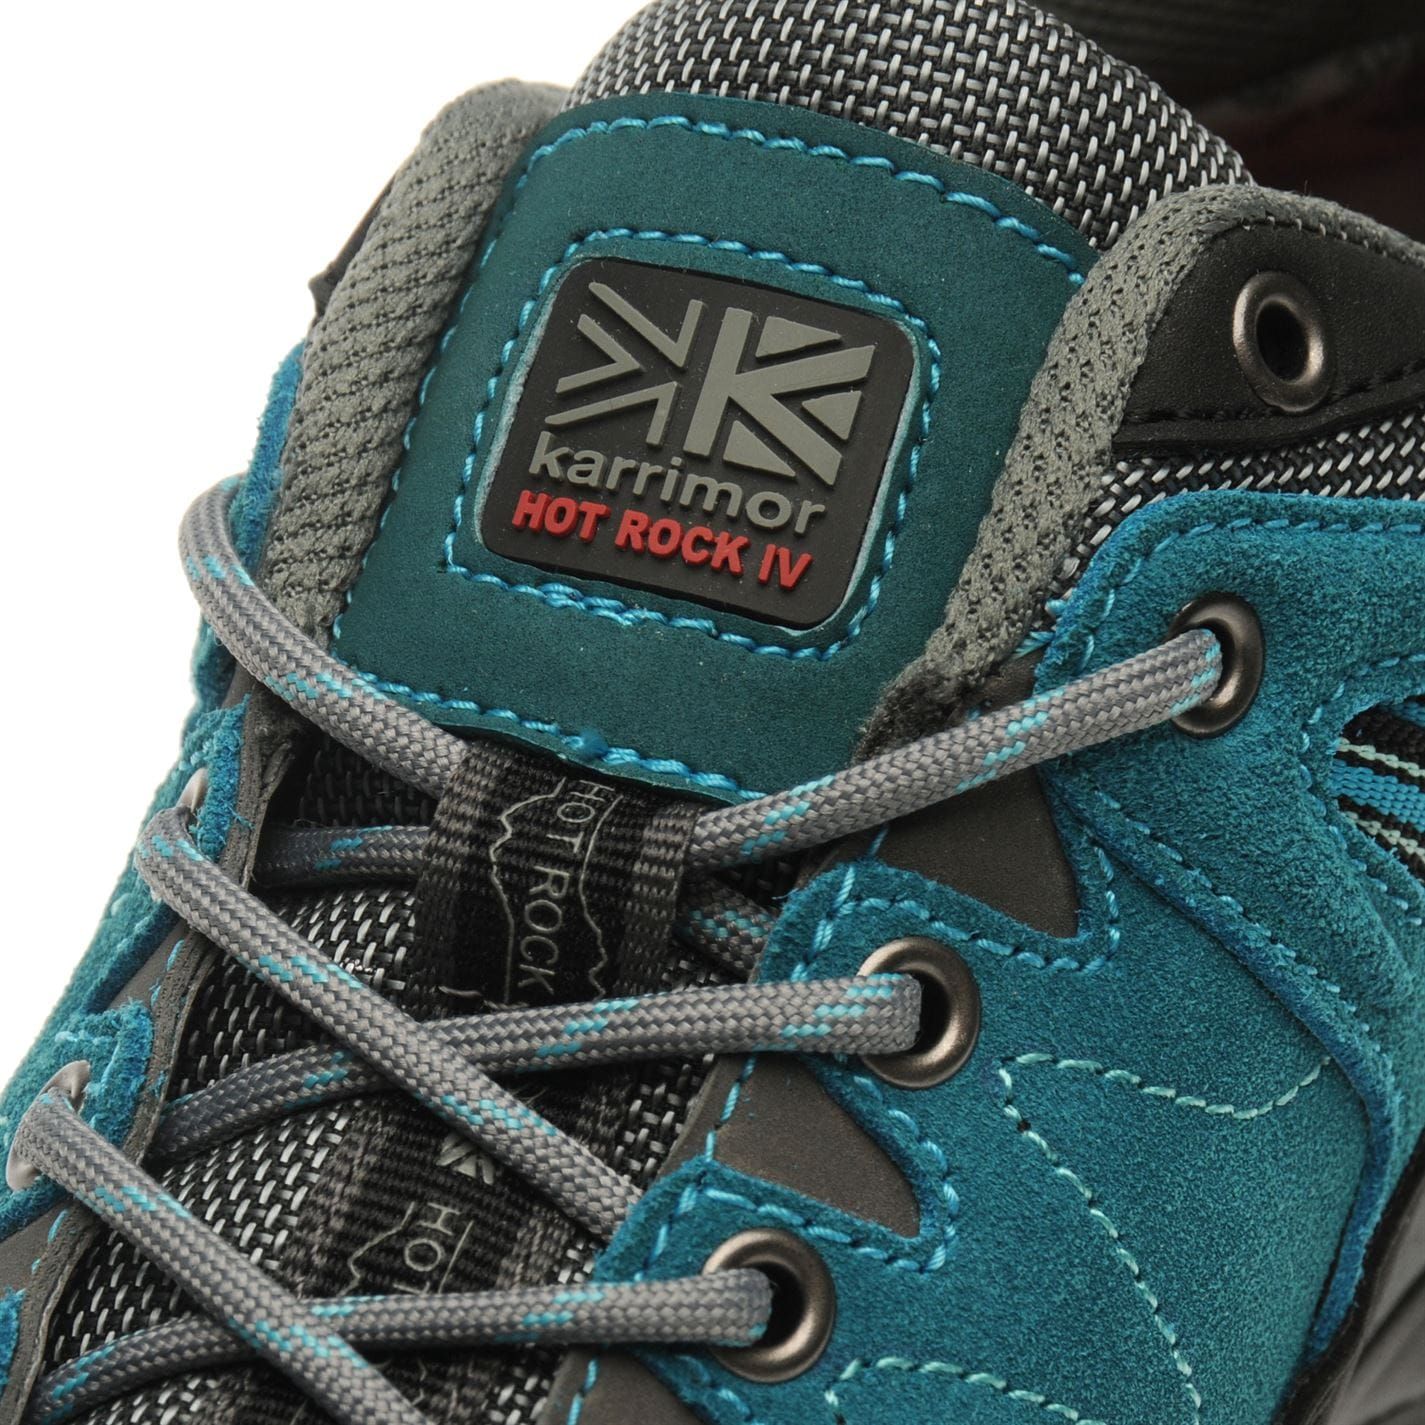 <strong> Karrimor Hot Rock Low Walking Shoes Ladies </strong><br><br> 
The Karrimor Hot Rock Low Walking Shoes have a suede upper with Weatherite Extreme technology. These shoes have a padded and shaped ankle collar for full protection and comfort when walking and are completed with the Karrimor logo for easy brand recognition.

<br><br>> Ladies walking shoes
<br>> Weatherite waterproof / breathable
<br>> Lace up fastening
<br>> Low cut, padded ankle collar
<br>> Shaped heel with pull loop
<br>> Frame Flex Chassis
<br>> Dynagrip sole unit
<br>> Karrimor logo
<br>> Upper : synthetic
<br>> Lining : textile
<br>> Sole : synthetic